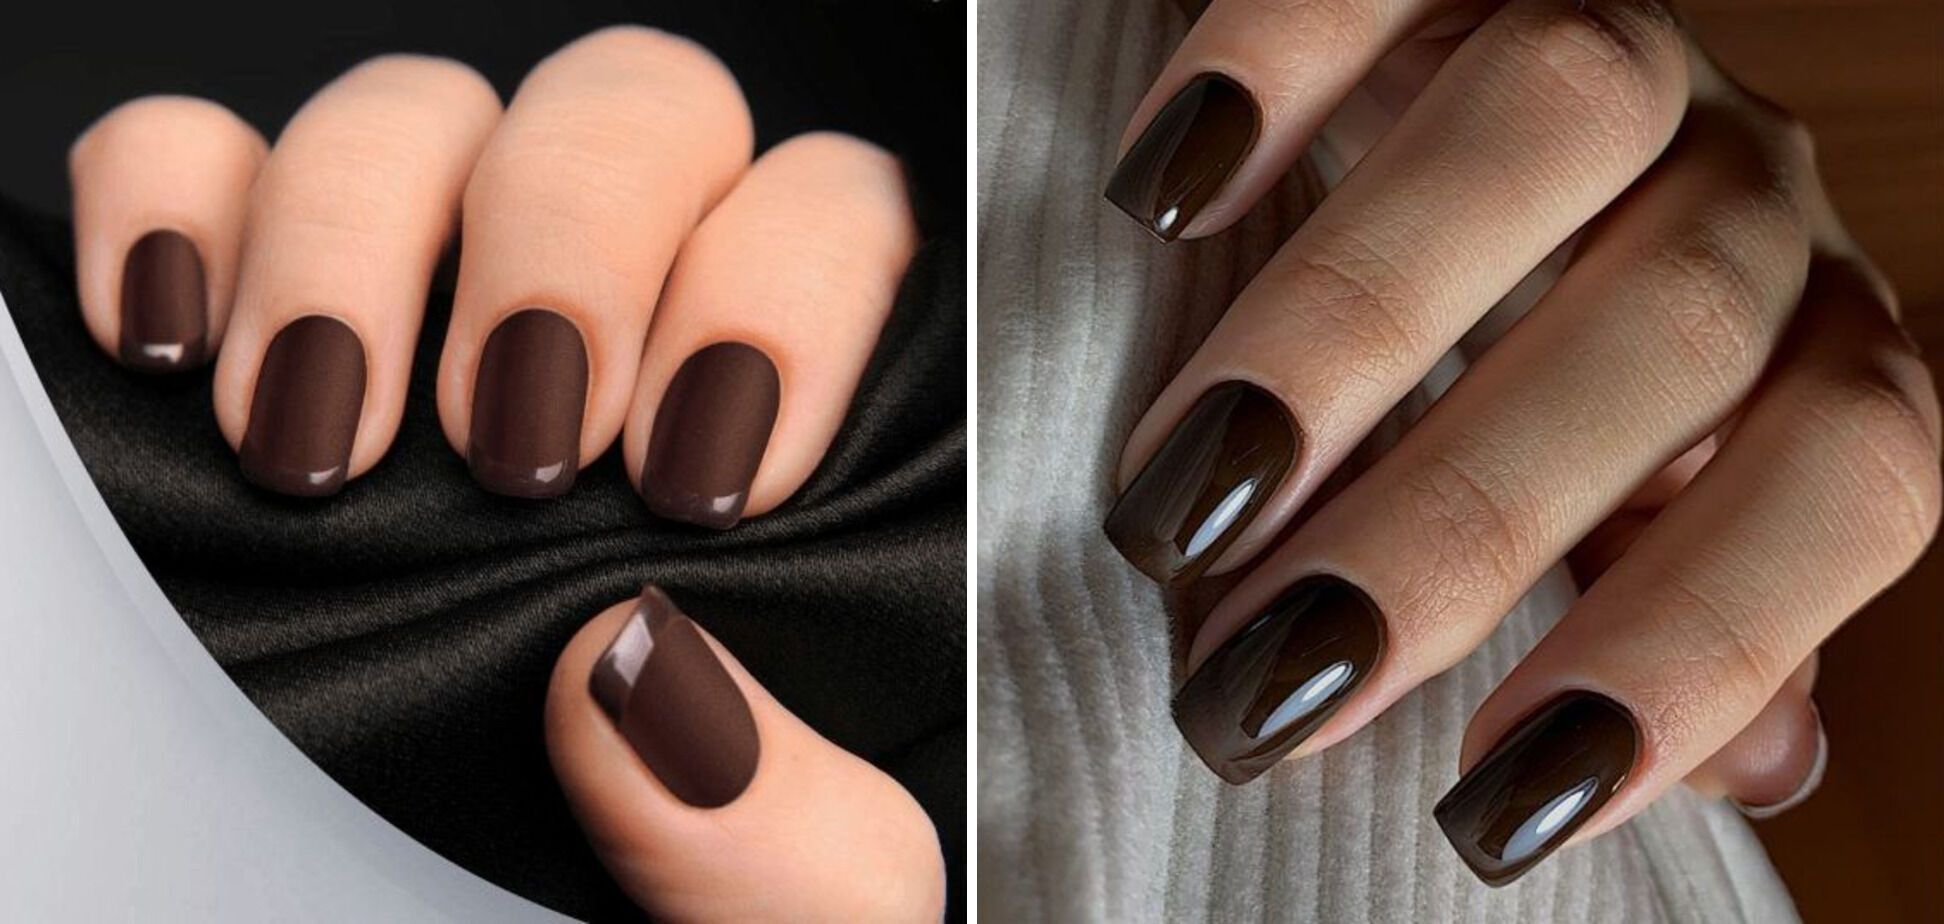 Forget about trends: 5 classic manicure colors that will create a Christmas mood